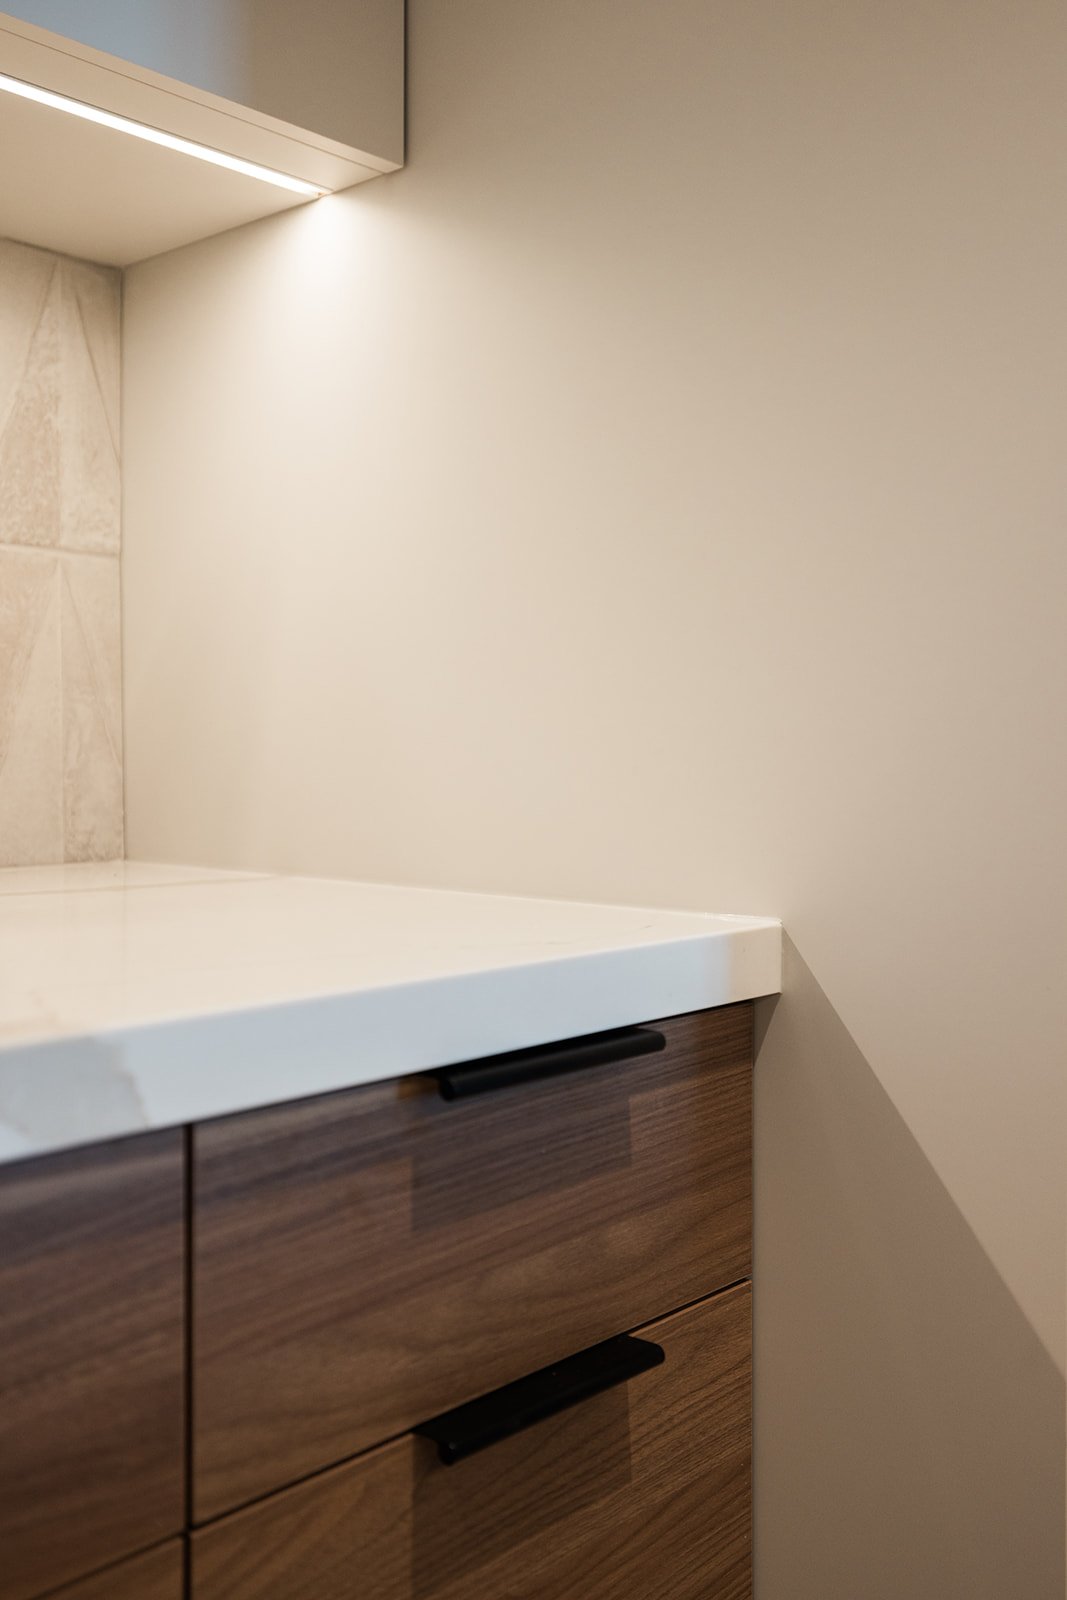 Countertop and pull-out cabinet details in GTA condo kitchen renovation